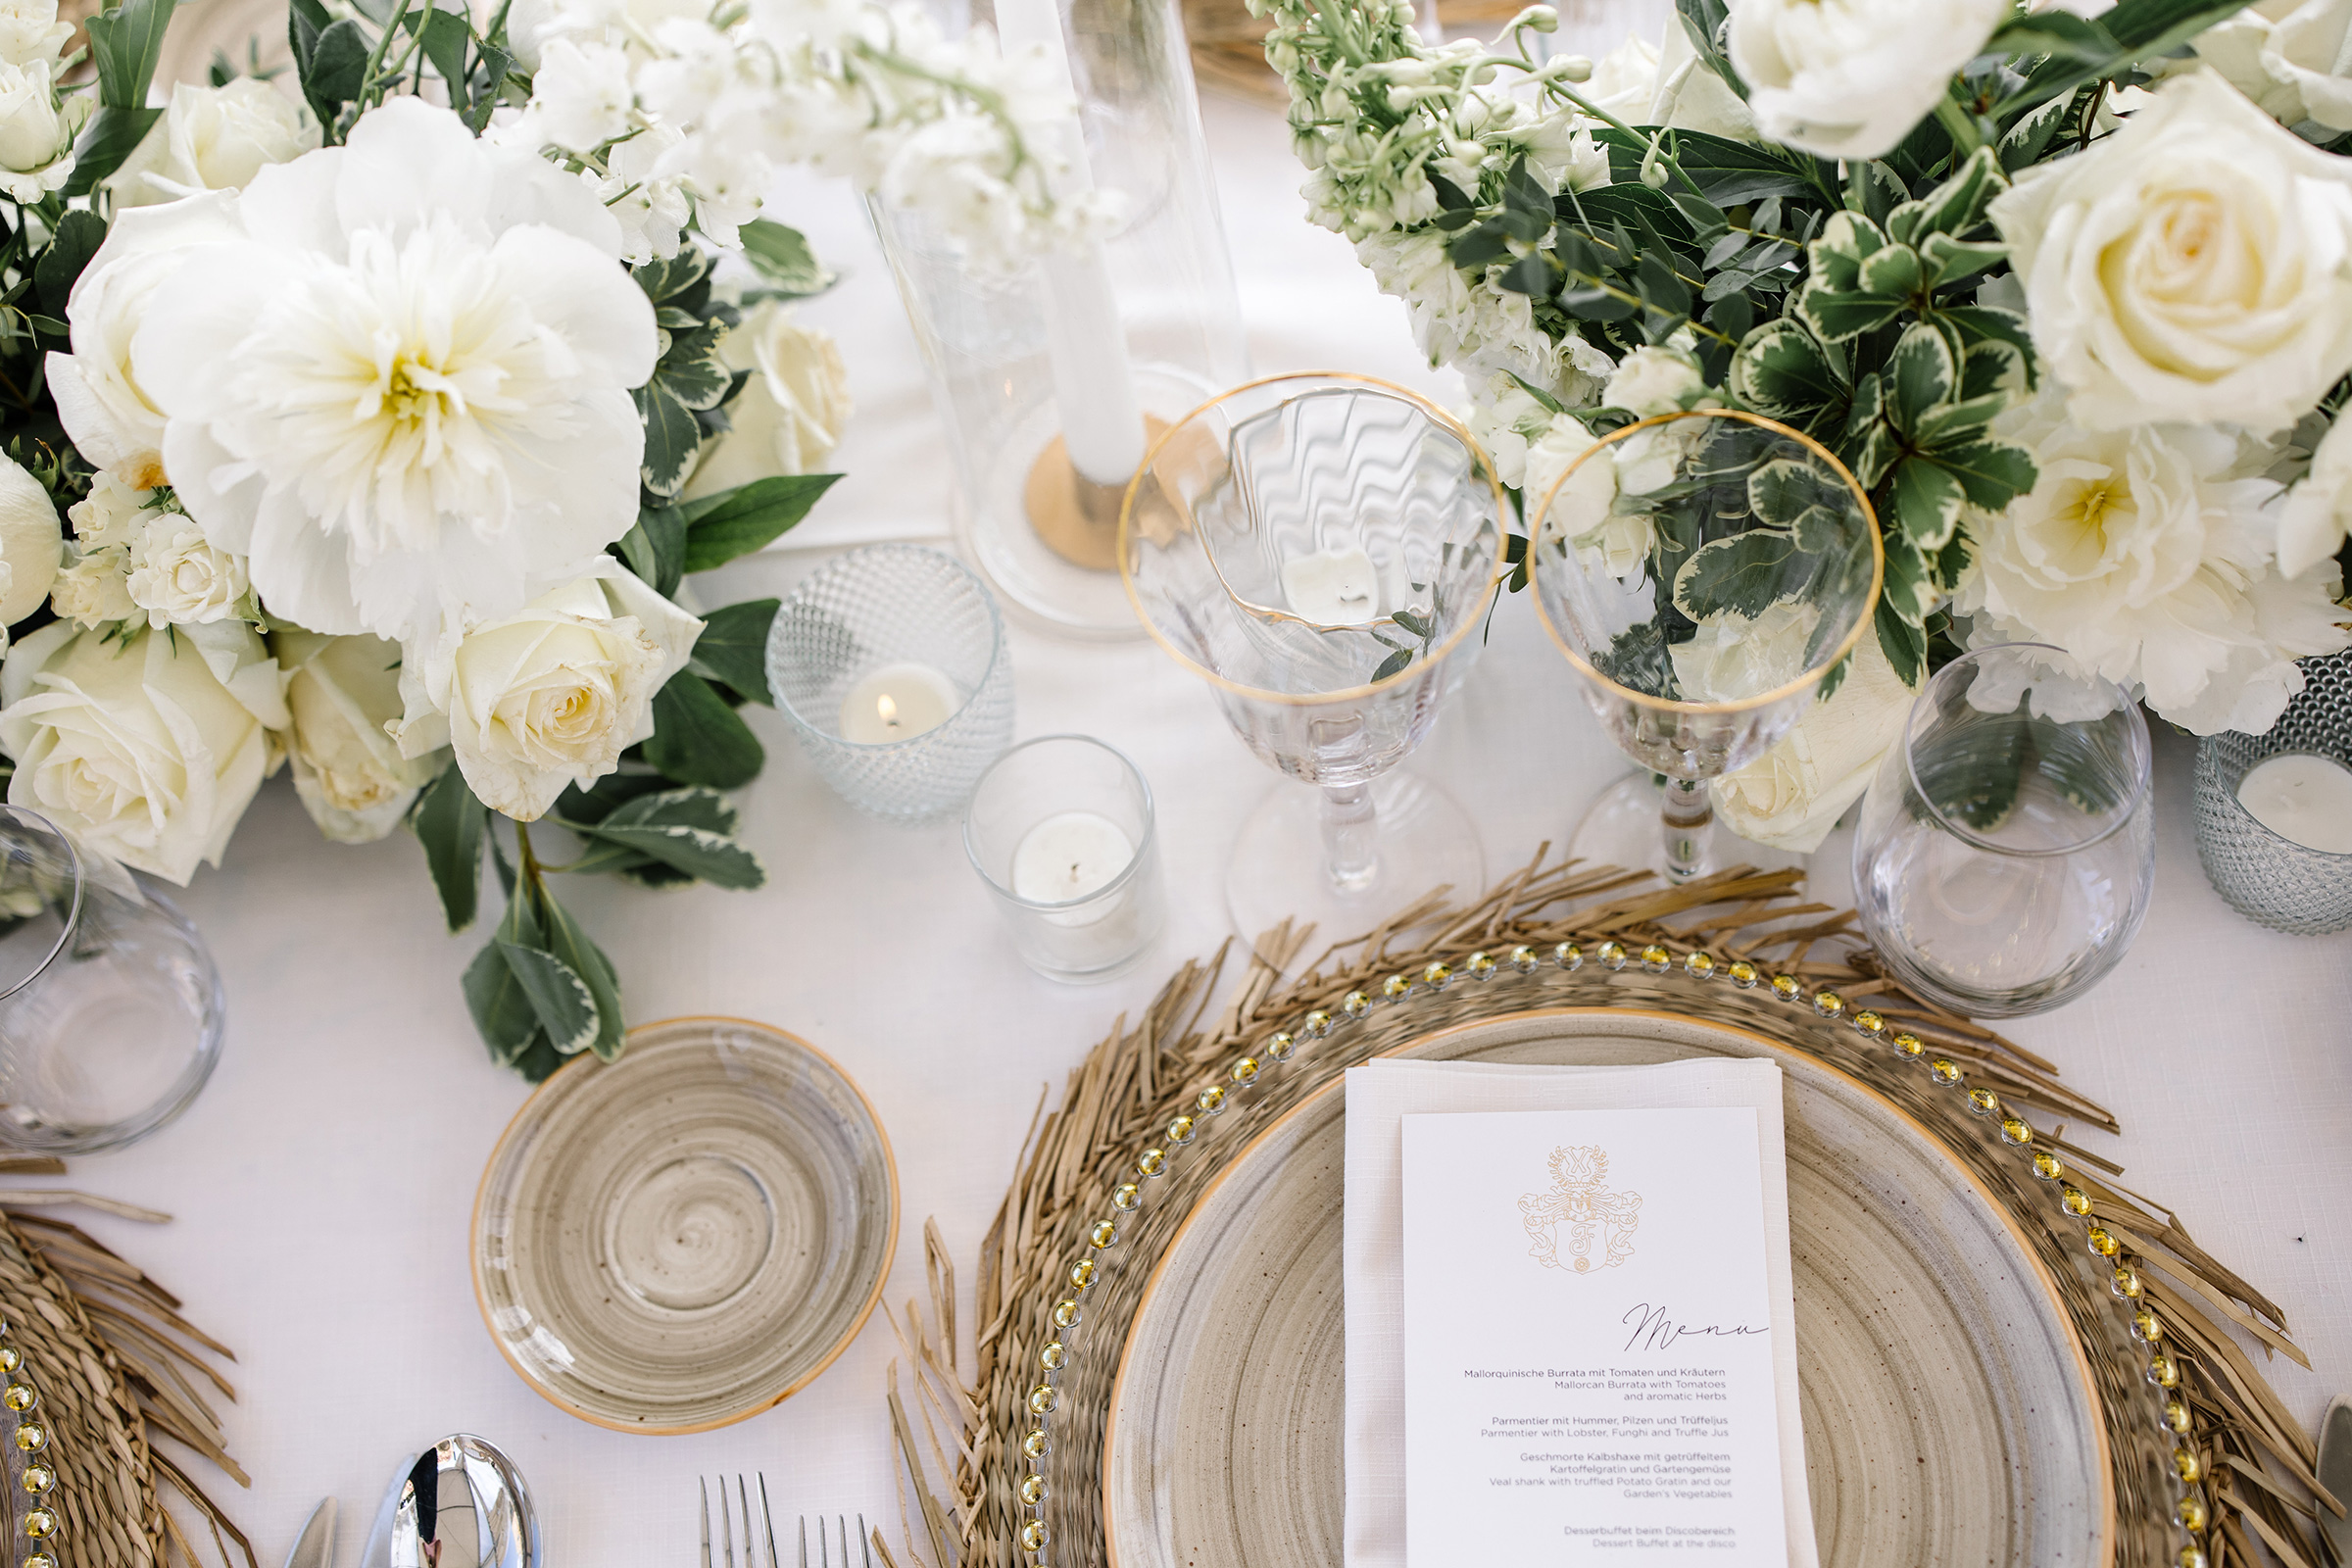 Luxury Wedding Table Setting in Gold White and Green by Mallorca Princess at La Fortaleza